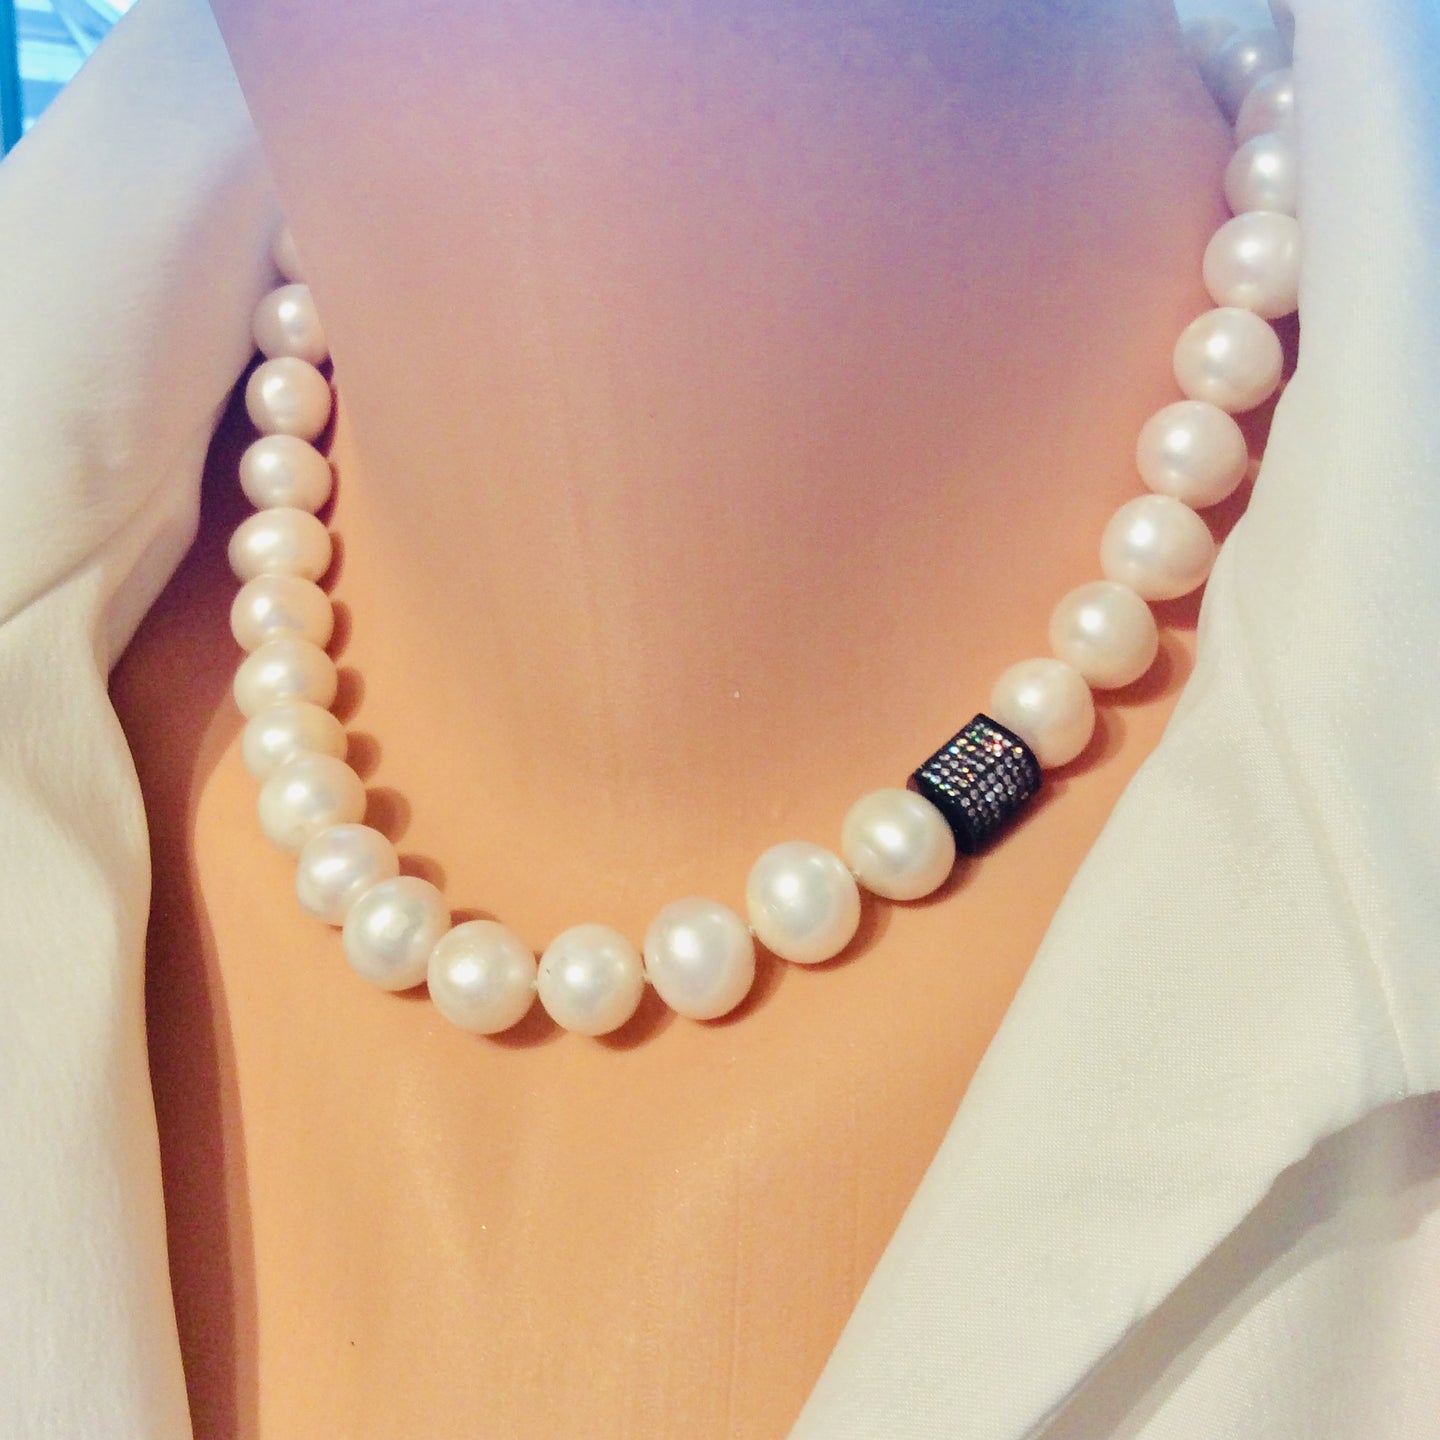 Freshwater Pearl Bridal Necklace, White Pearls Short Necklace, 16.5